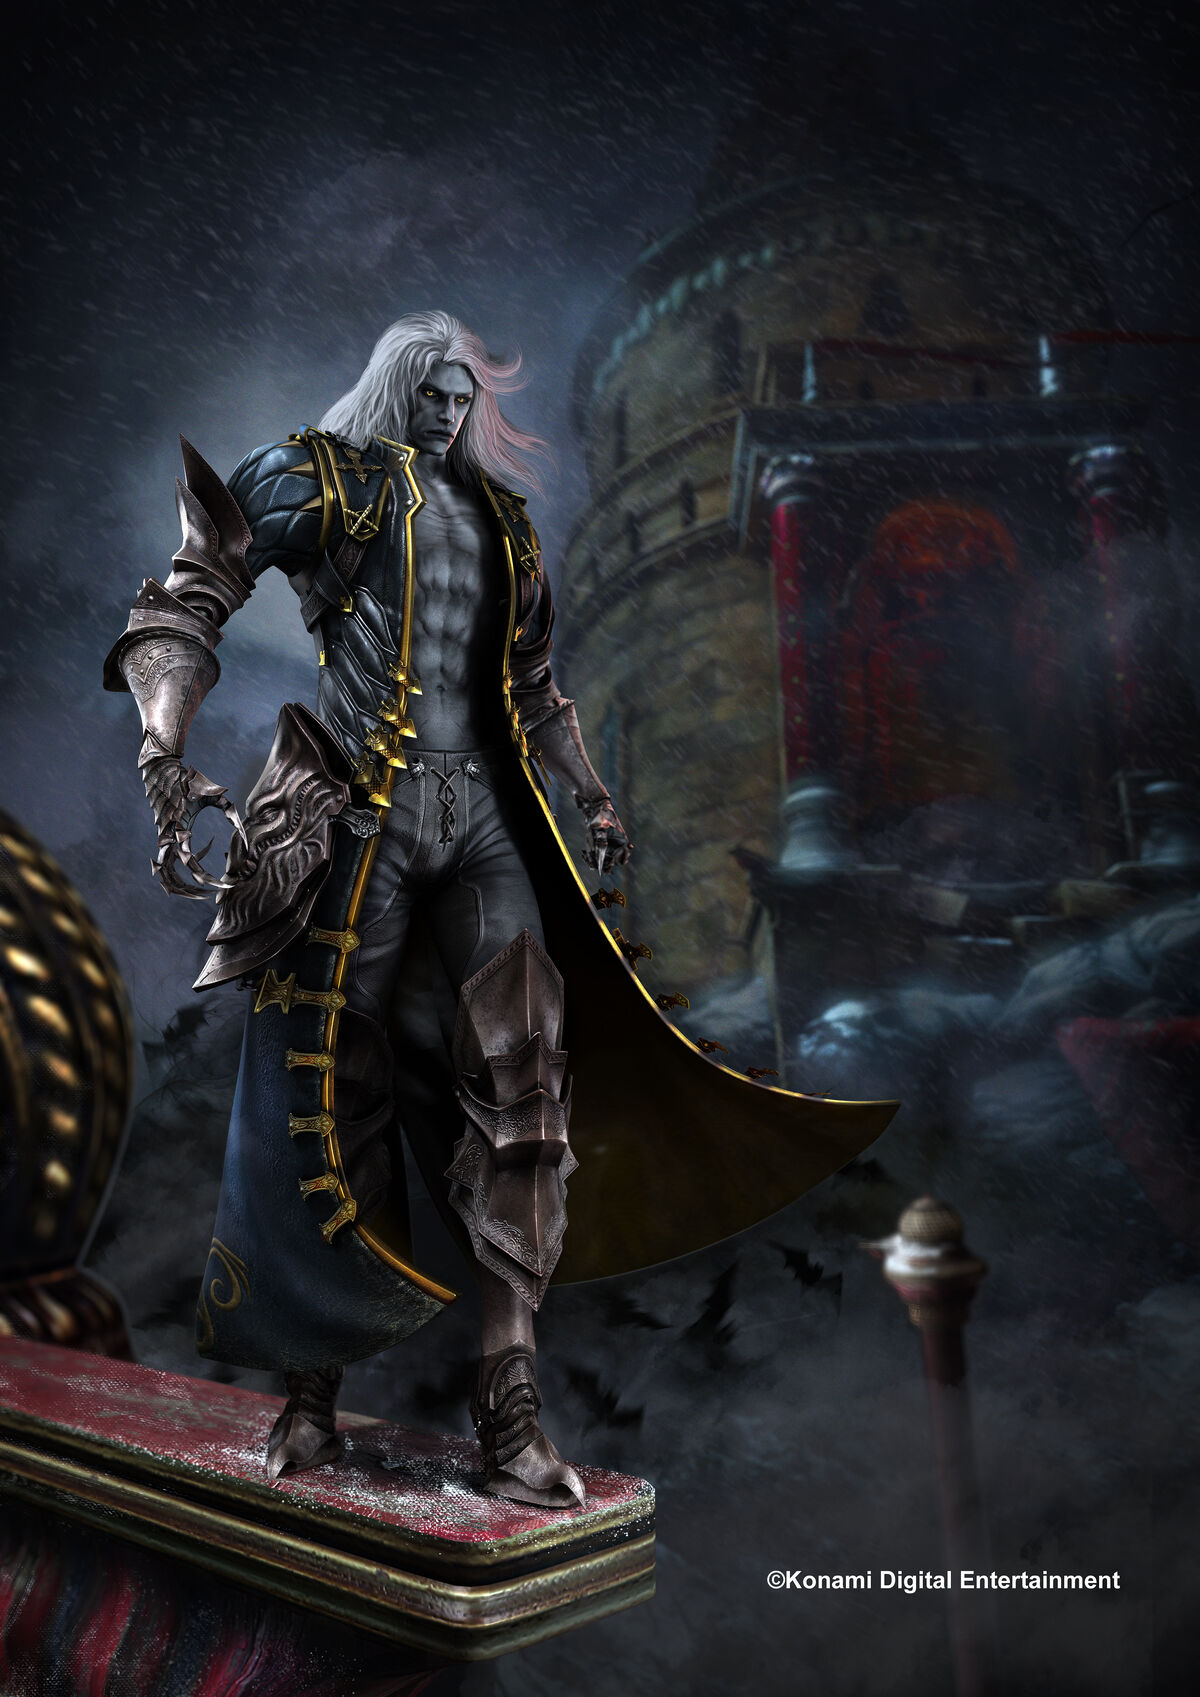 Lords of Shadow 2 – vampire epic with no spark?